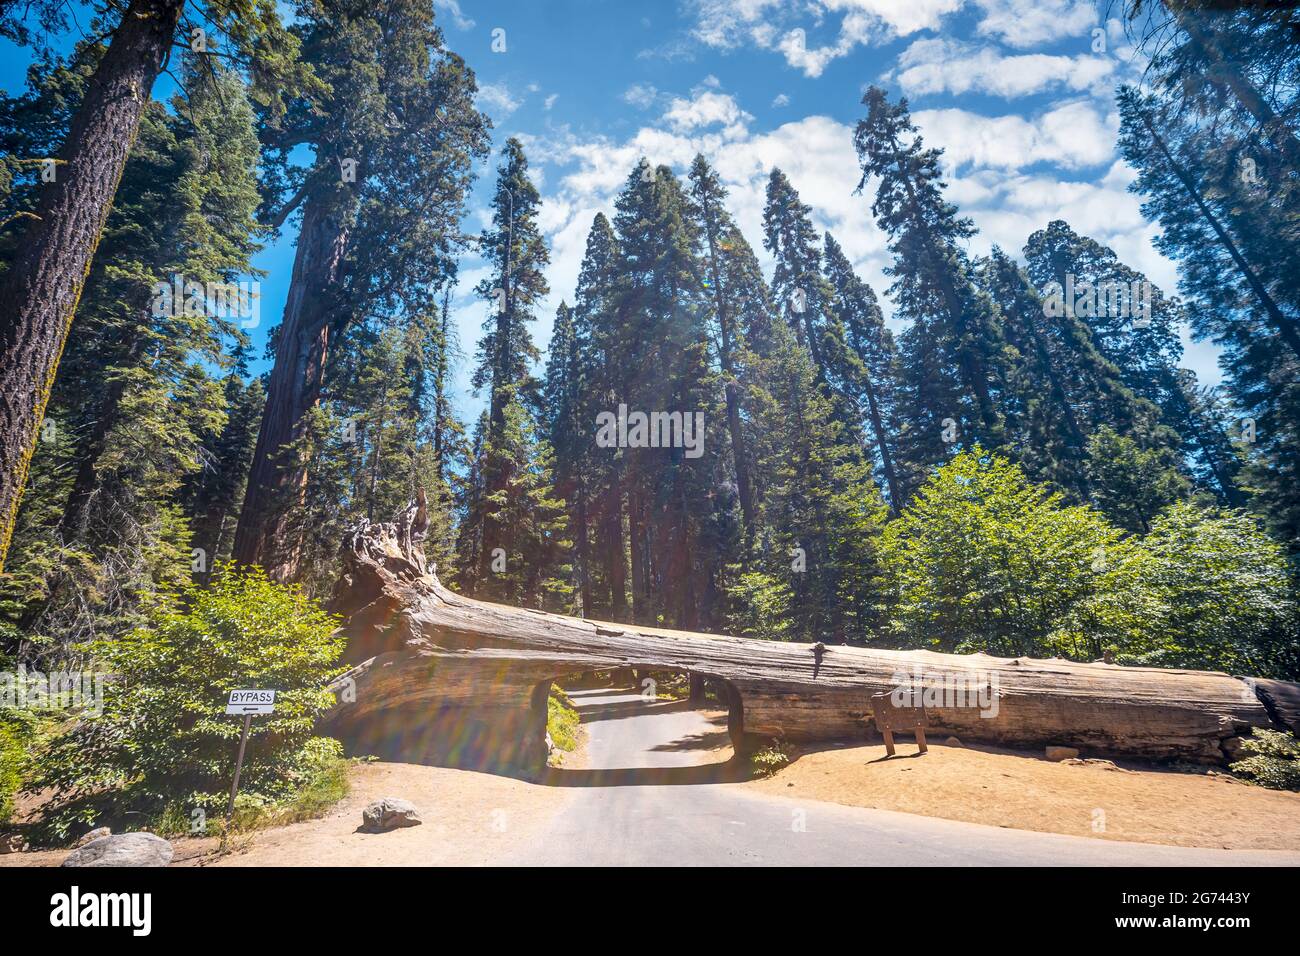 The beautiful Tunnel Log in Sequoia National Park for vehicles in California United States Stock Photo